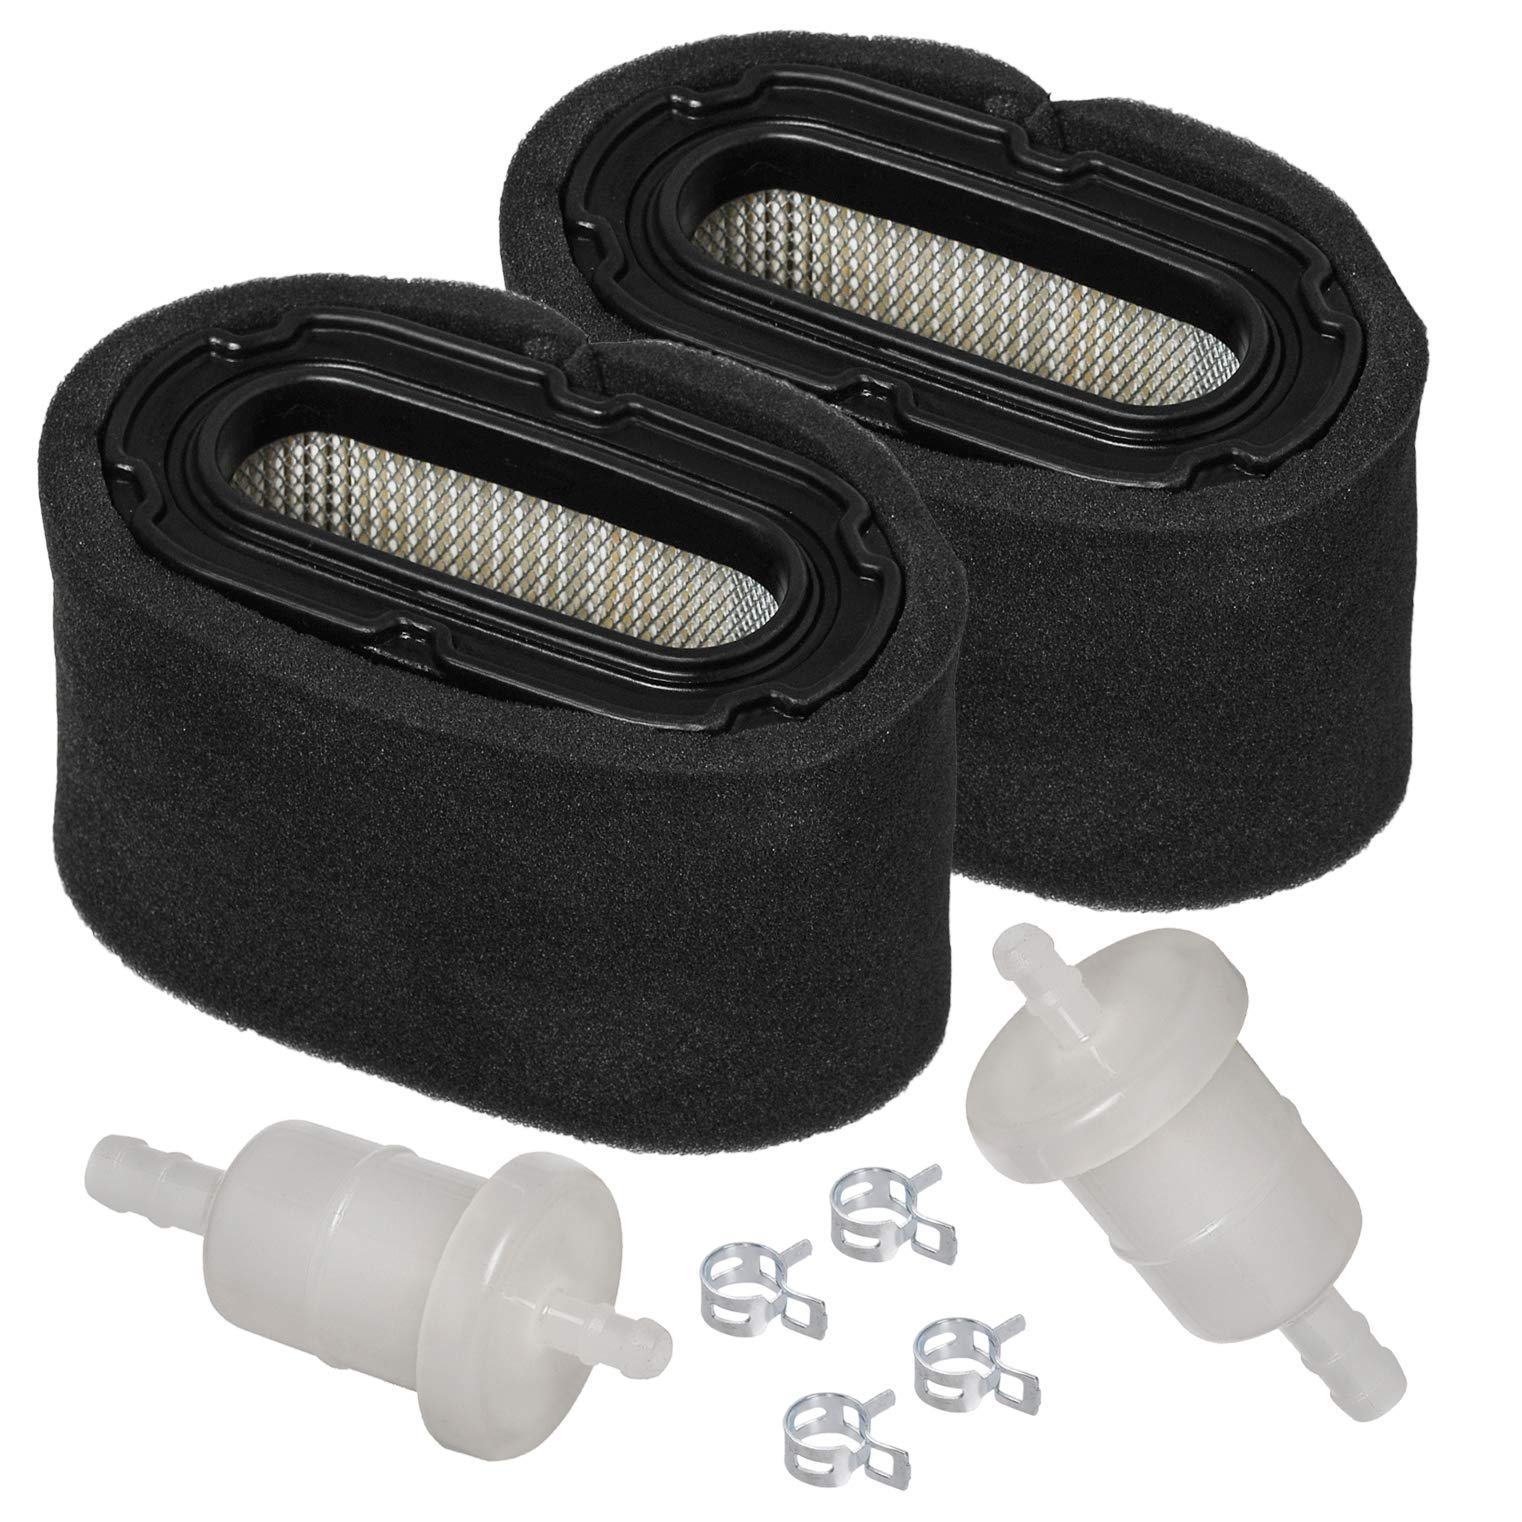 hifrom Set of Air Filter & Pre Filter with Fuel Filter Compatible with Honda GXV340 GXV390 11hp 13hp Replace 17211-ZF5-V01 17211-ZF5-V00, Lawn Mower Air Cleaner 2pcs von hifrom